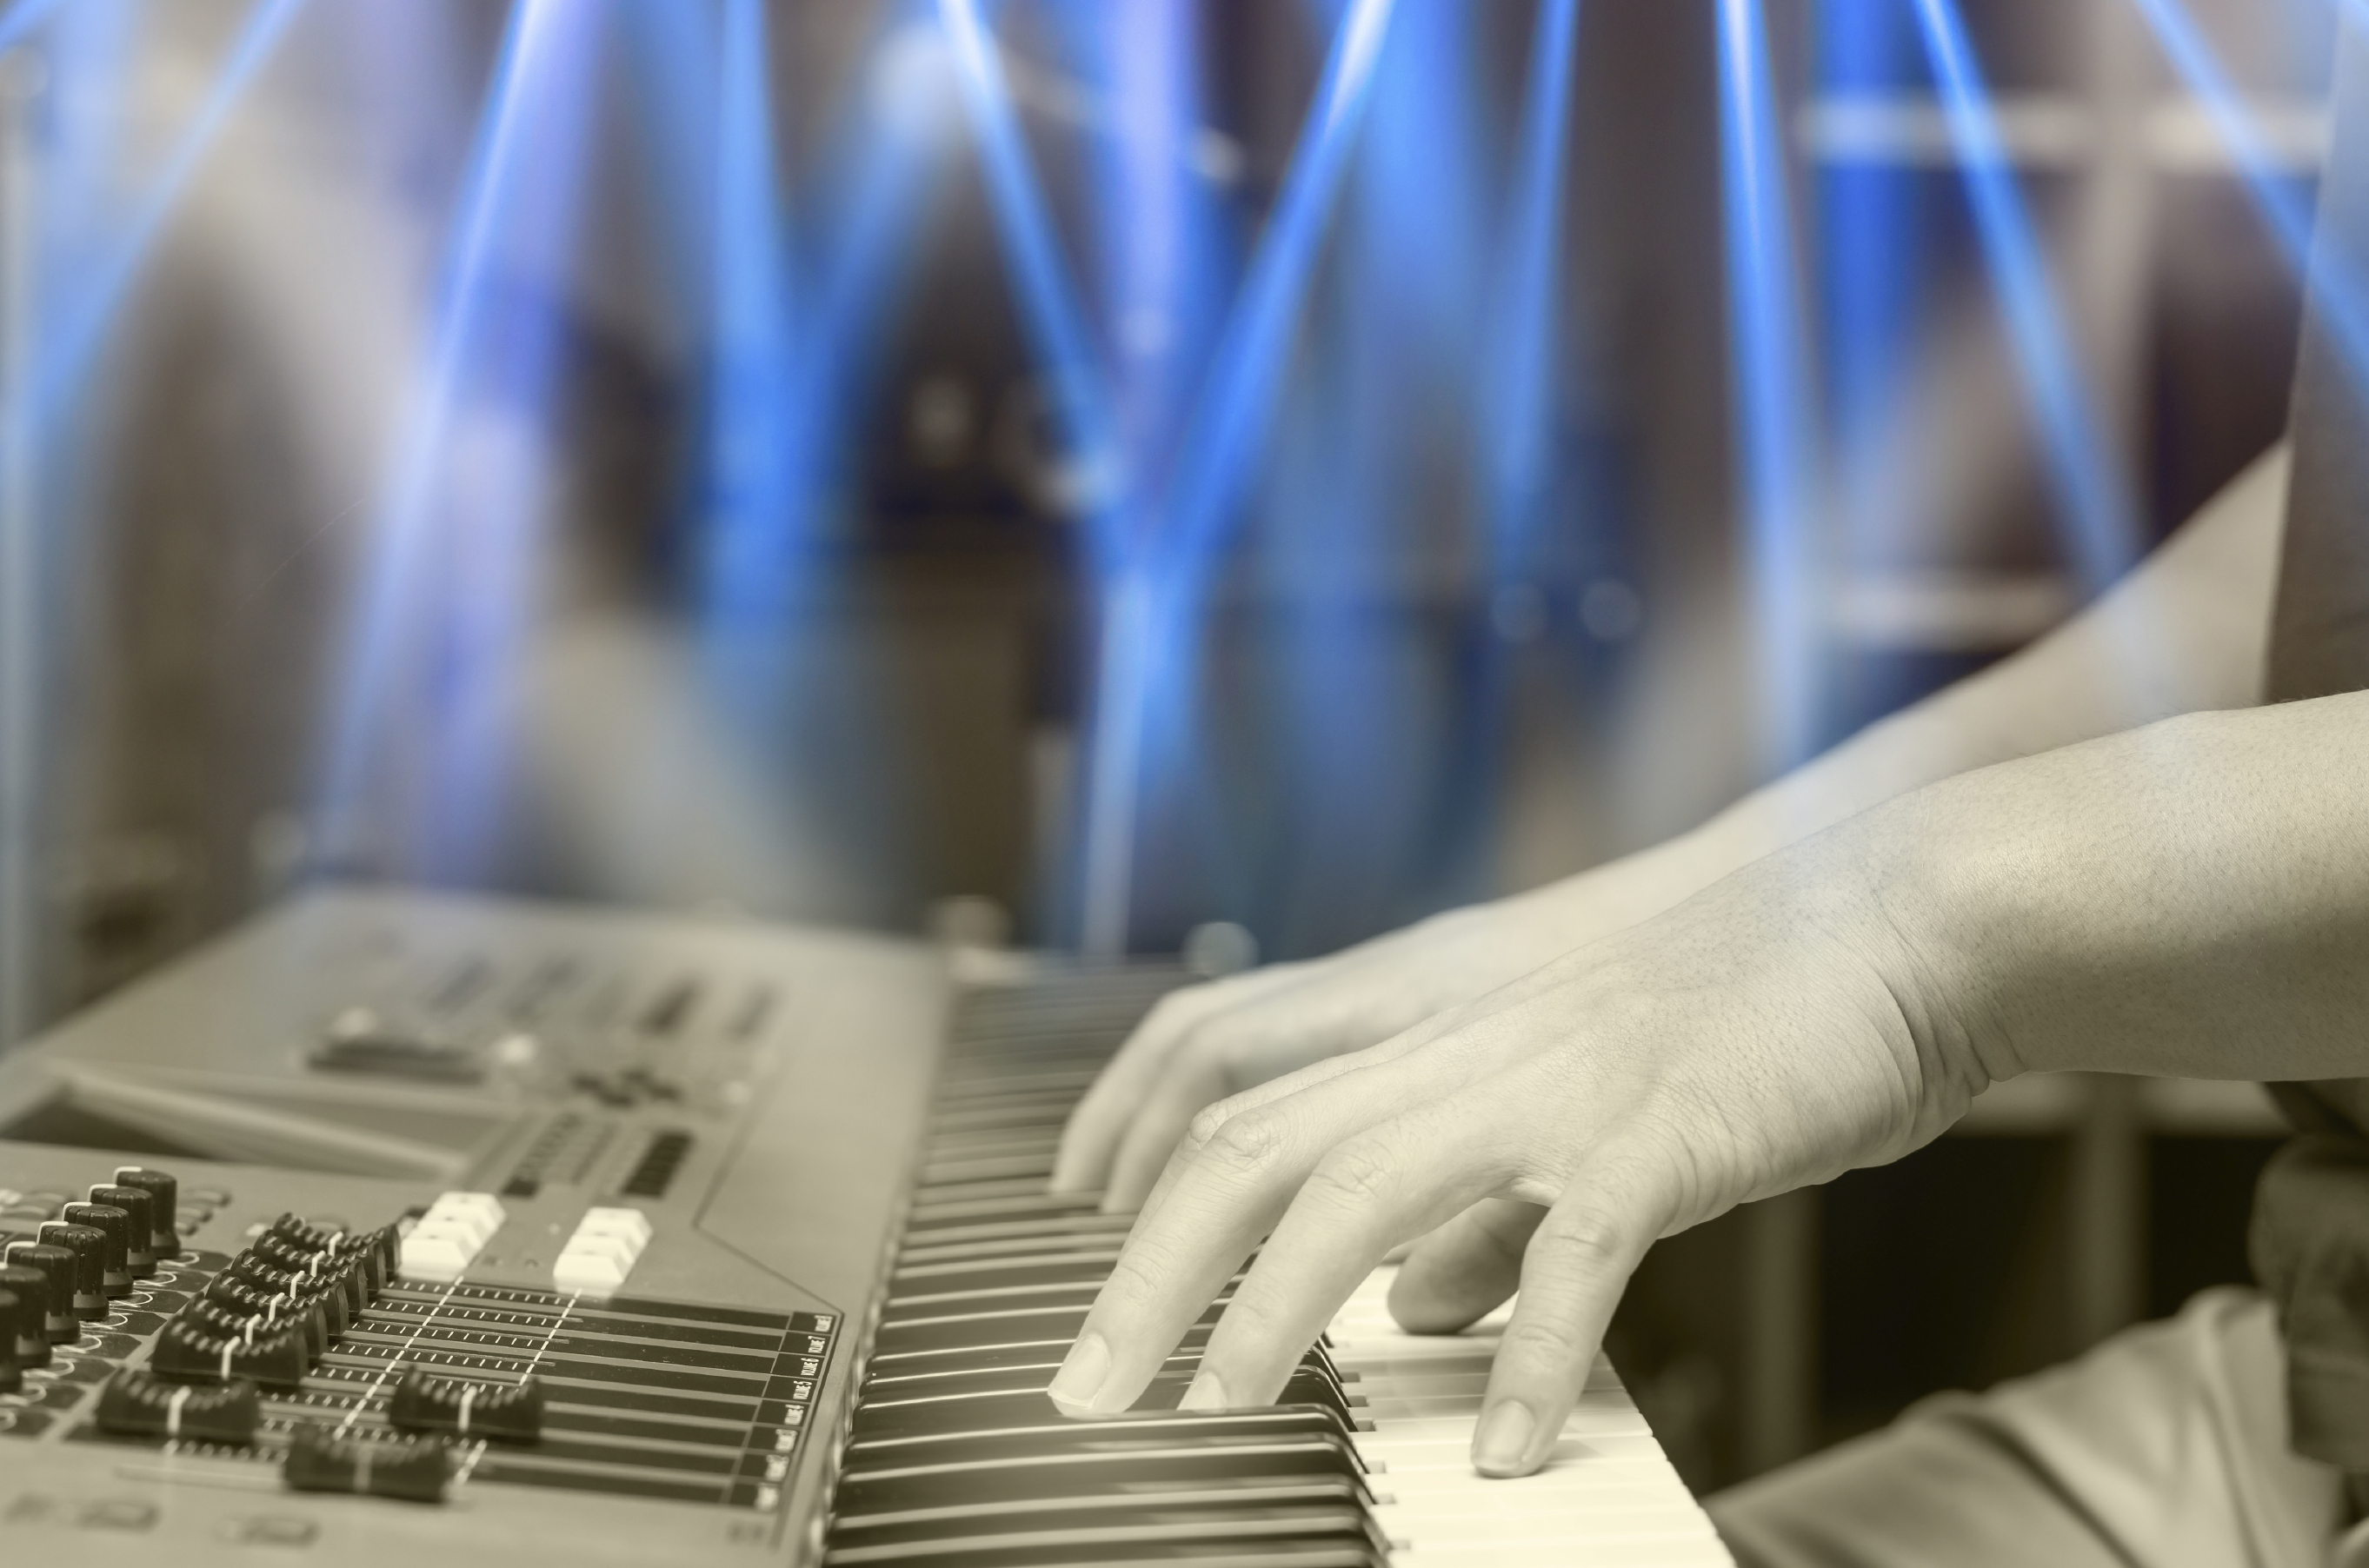 Getting into the groove: Scientists have long tried to understand creativity in music. | ISTOCK